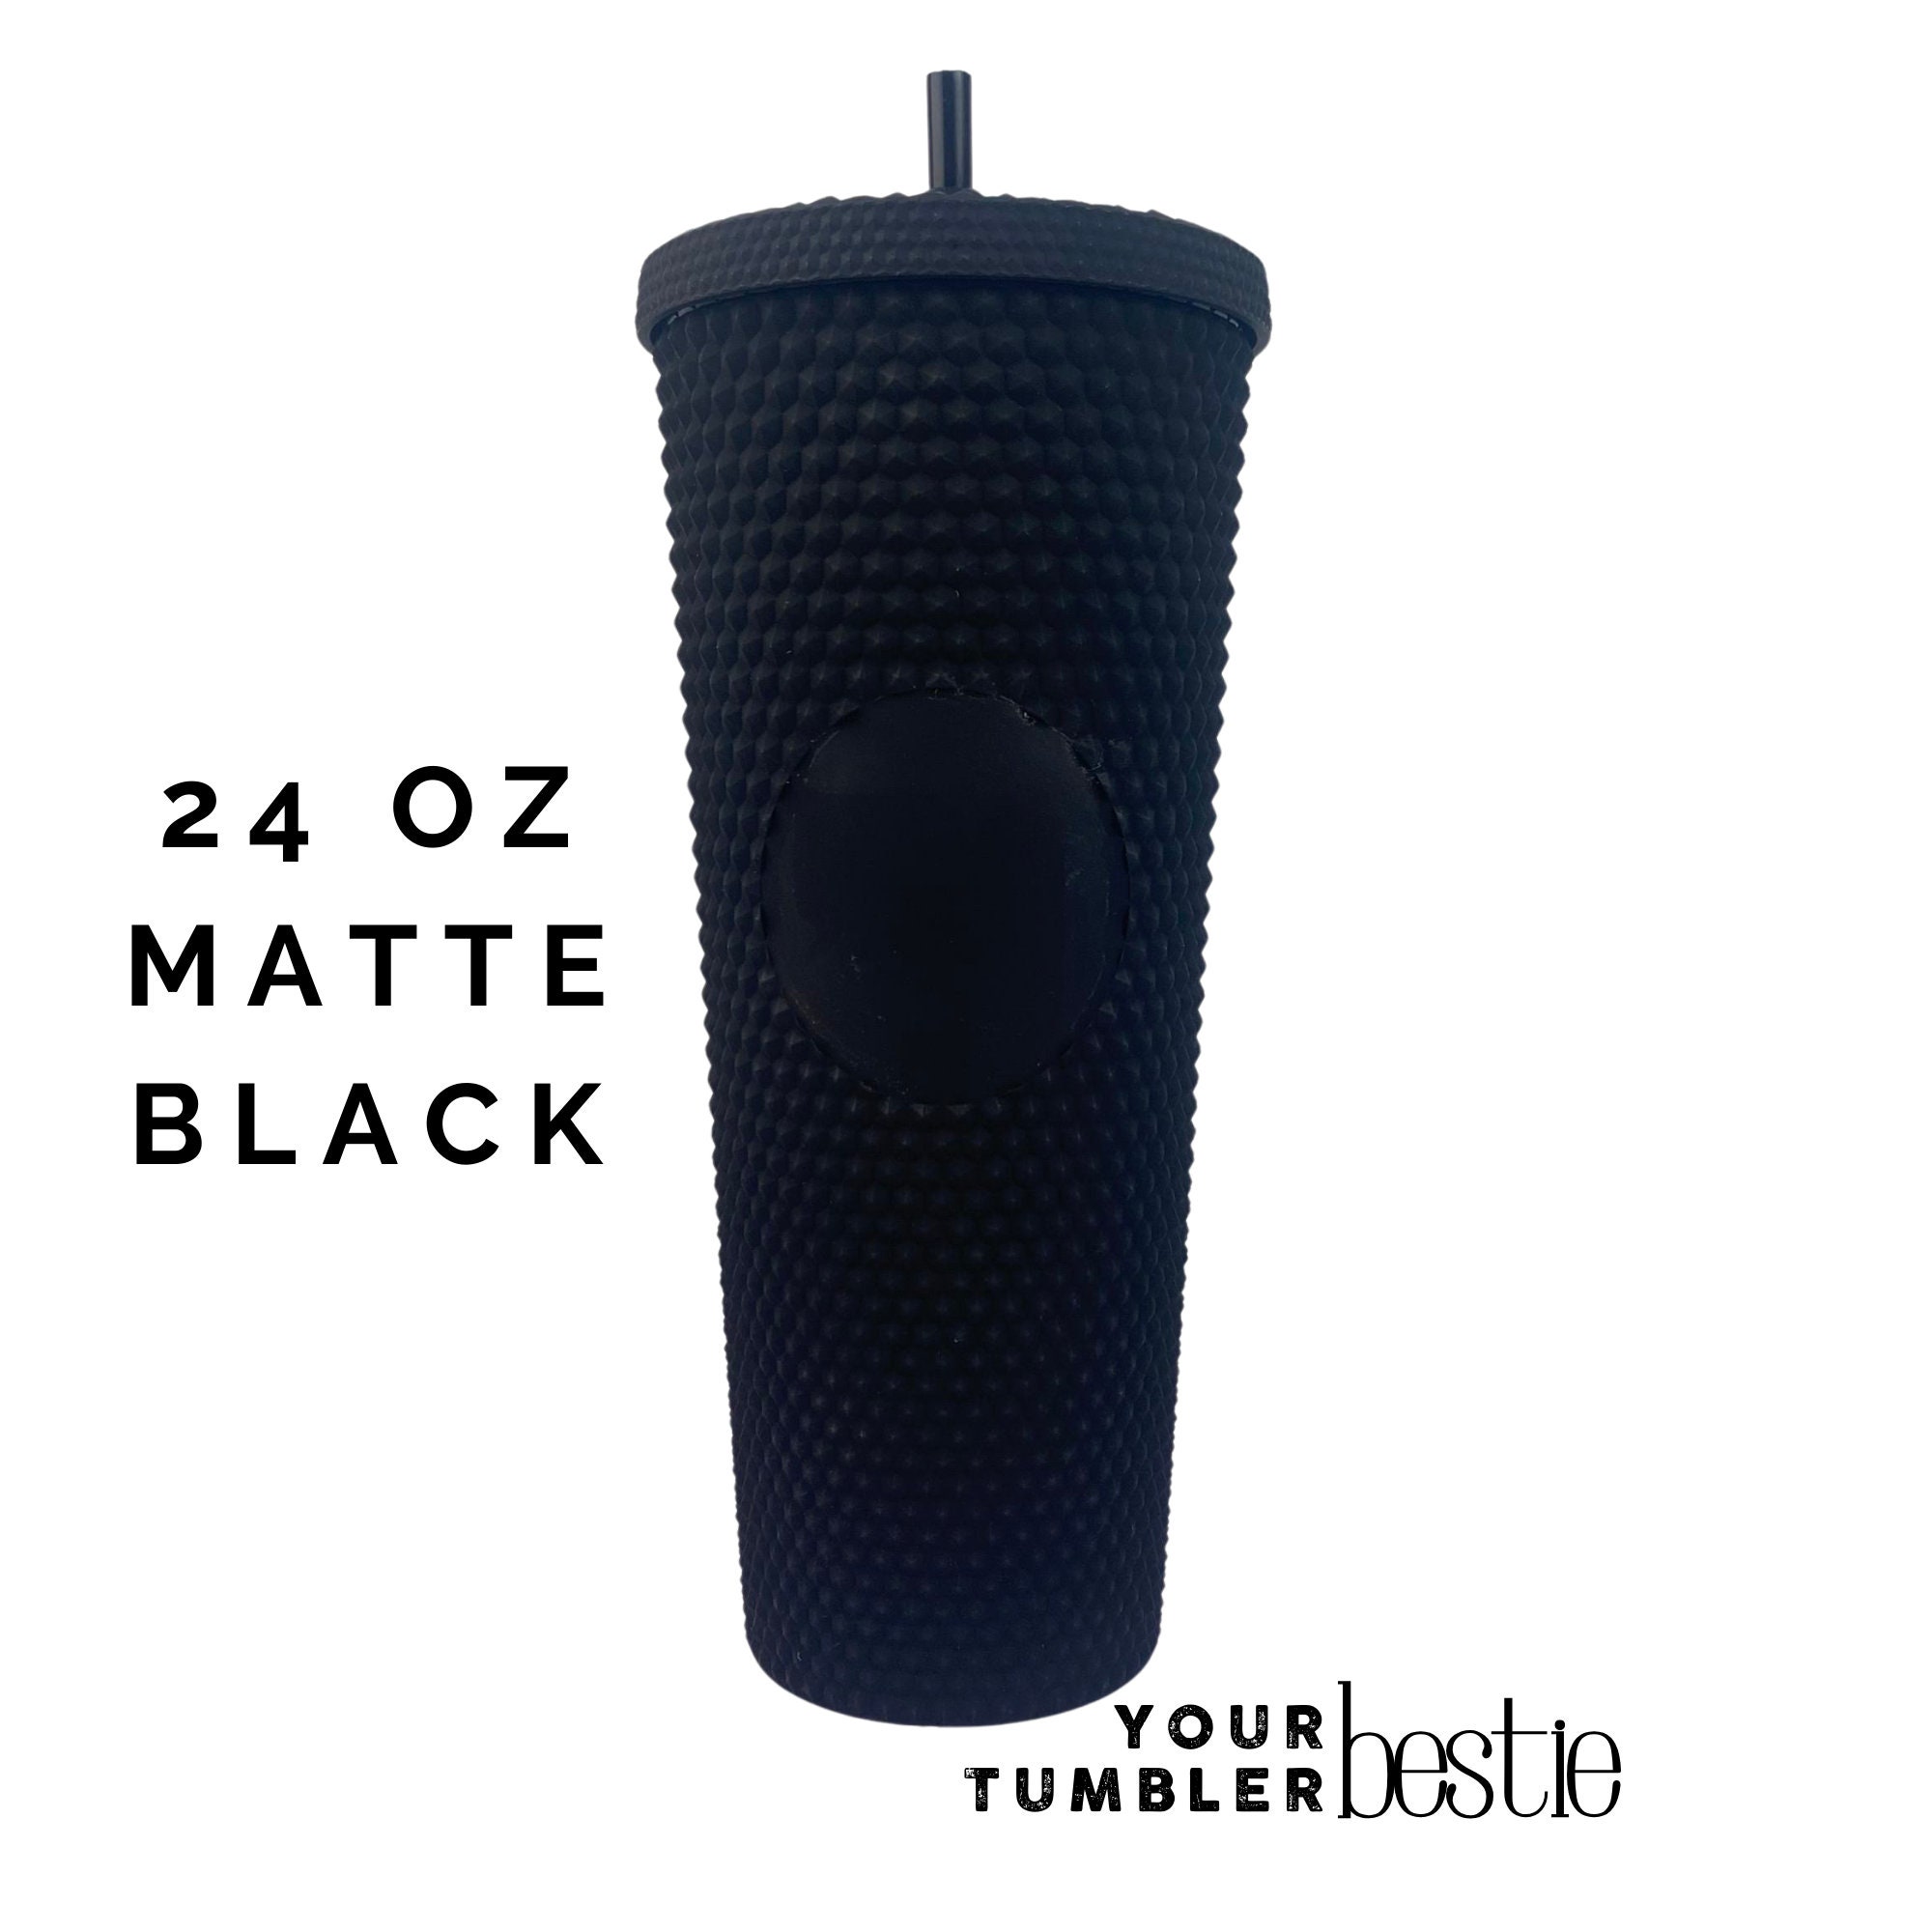 CUP ONE - Black mat